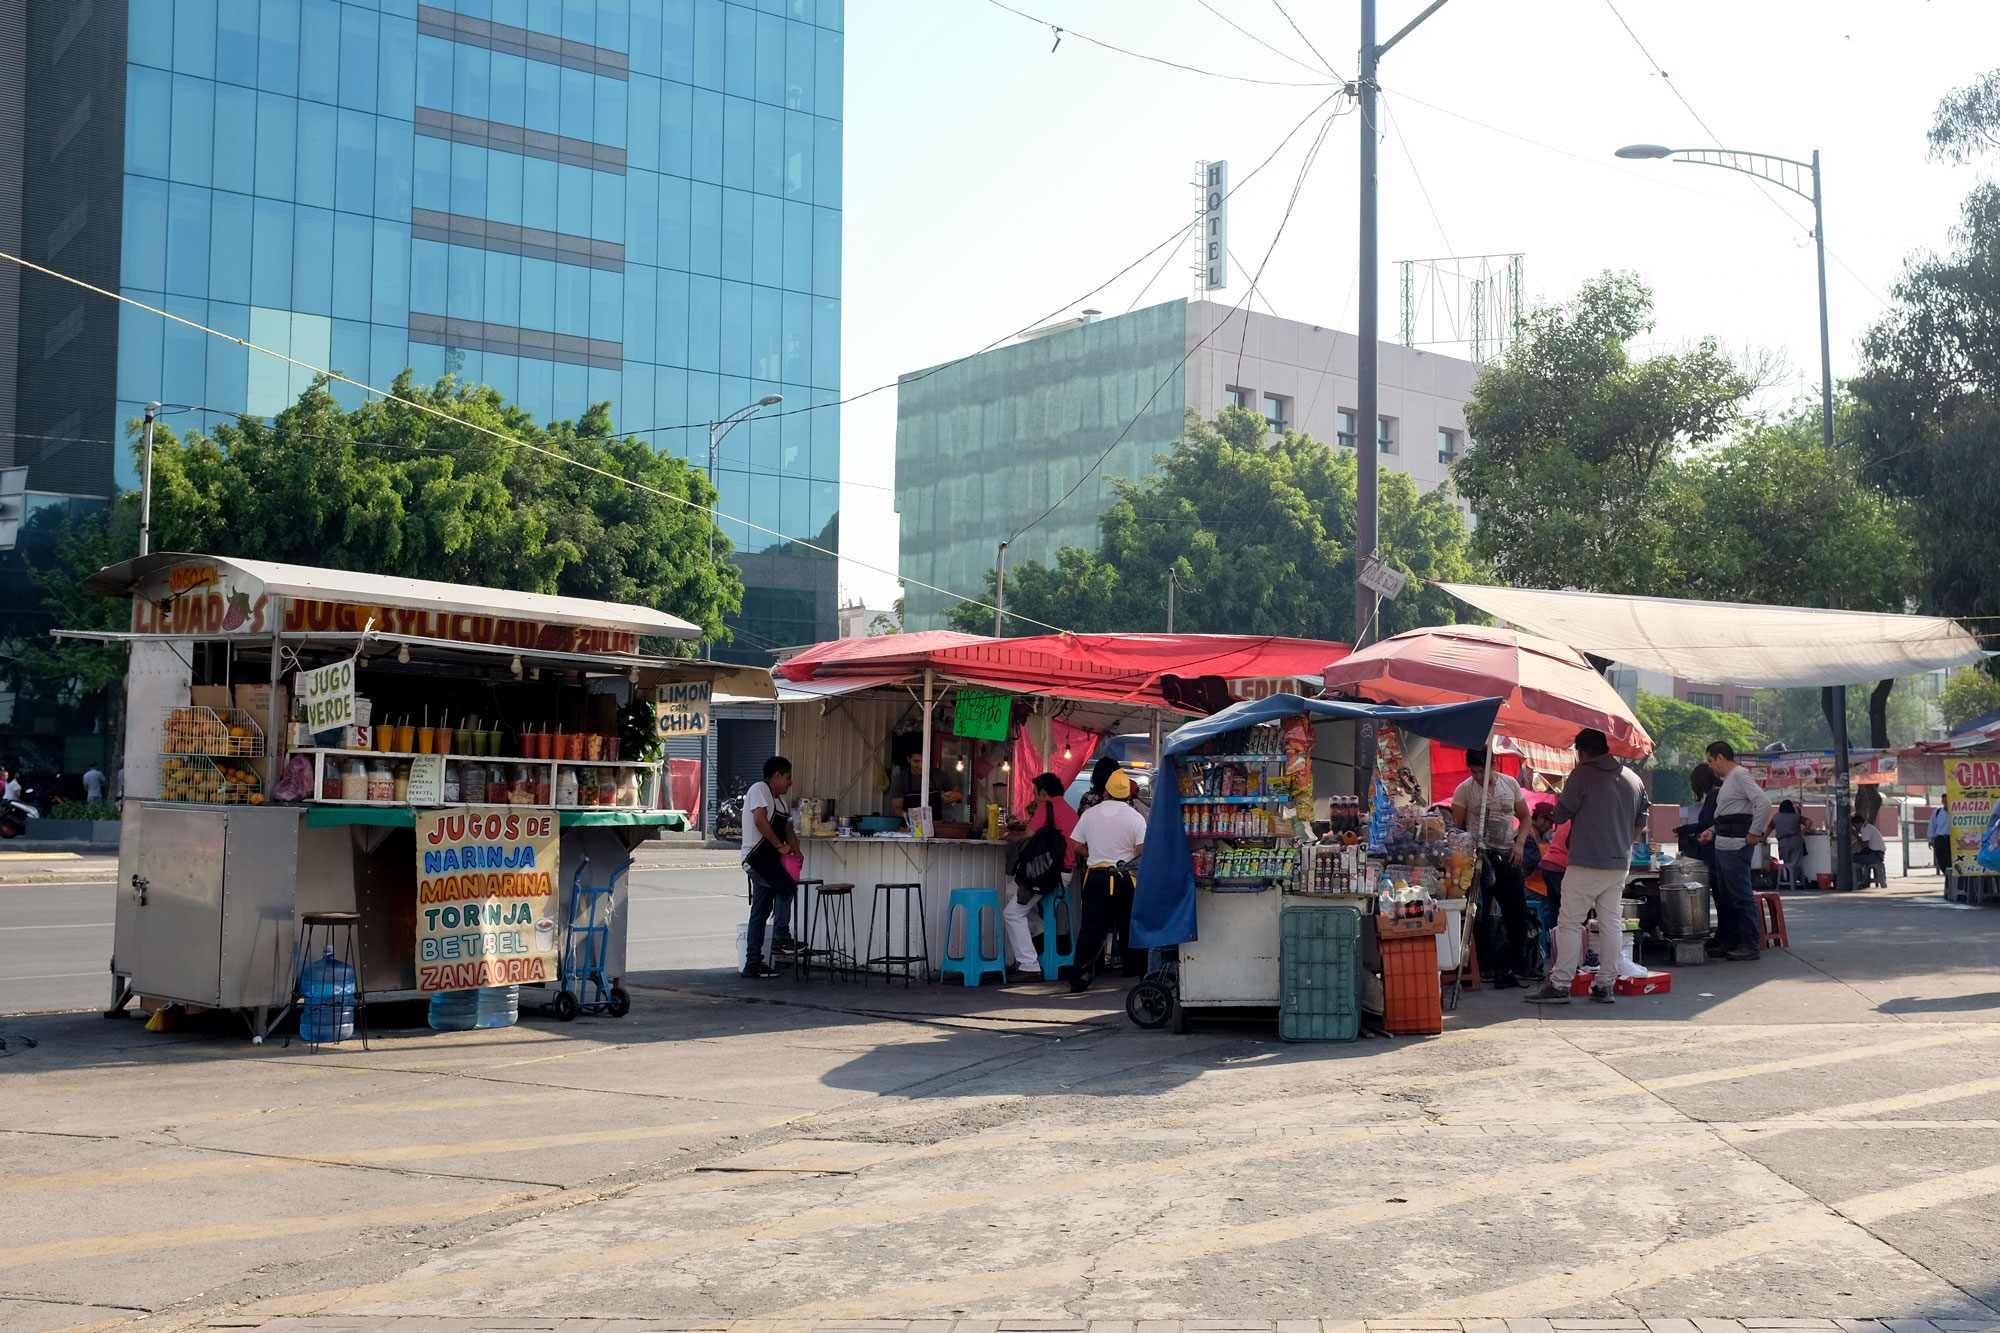 Street vendors and their stalls of juice and other foods